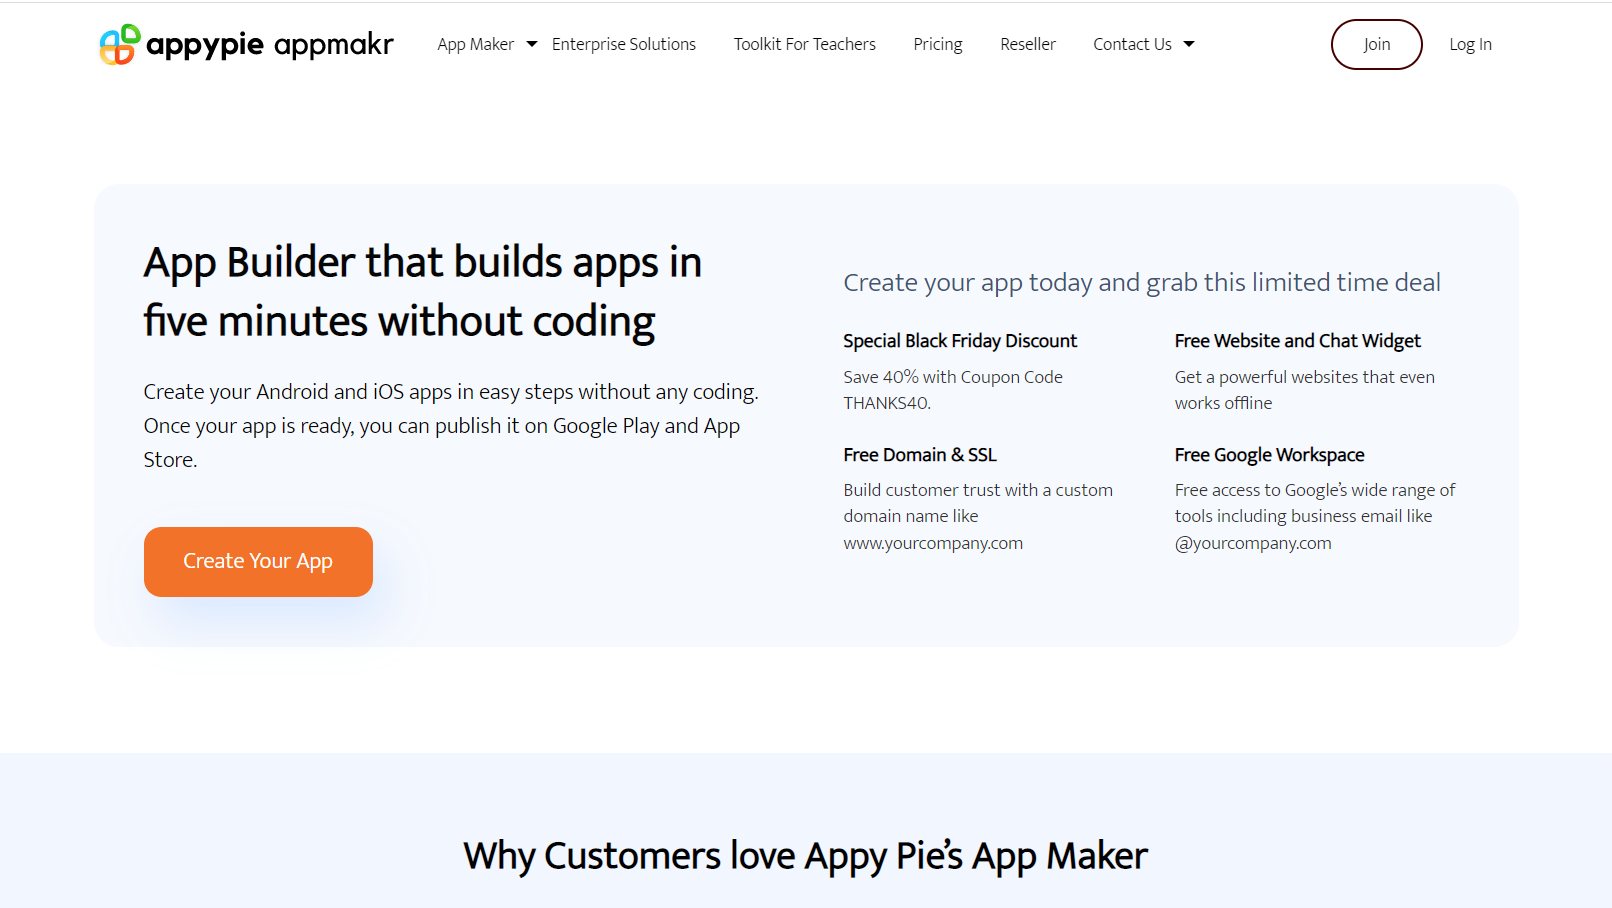 App Builder that builds apps in five minutes without coding